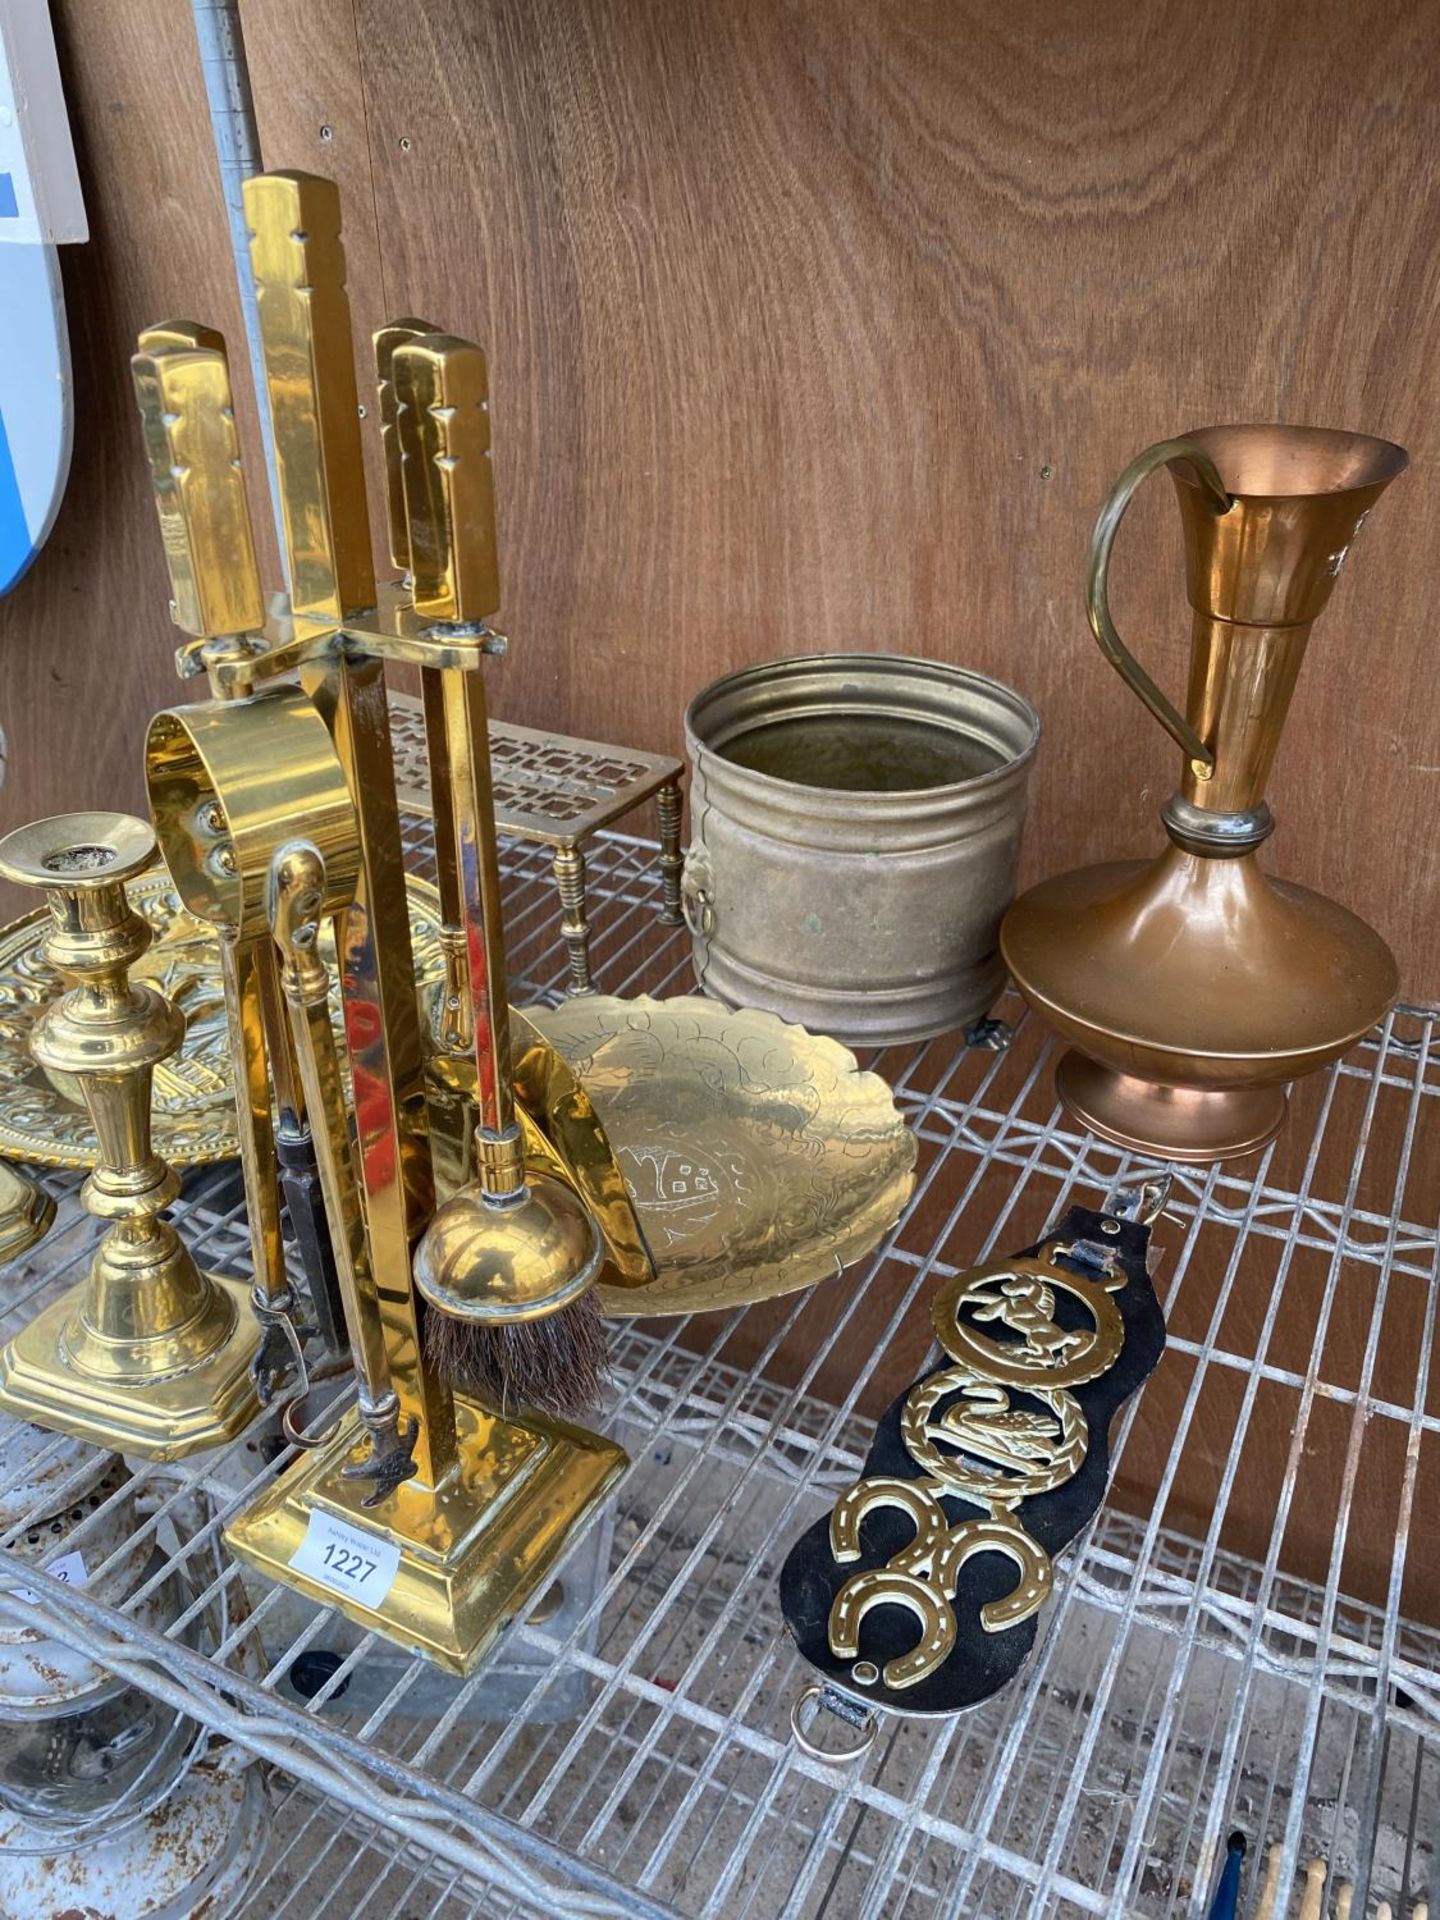 AN ASSORTMENT OF BRASS AND COPPER TO INCLUDE A BRASS FIRESIDE COMPANION SET, BRASS CANDLE STICKS AND - Image 3 of 4